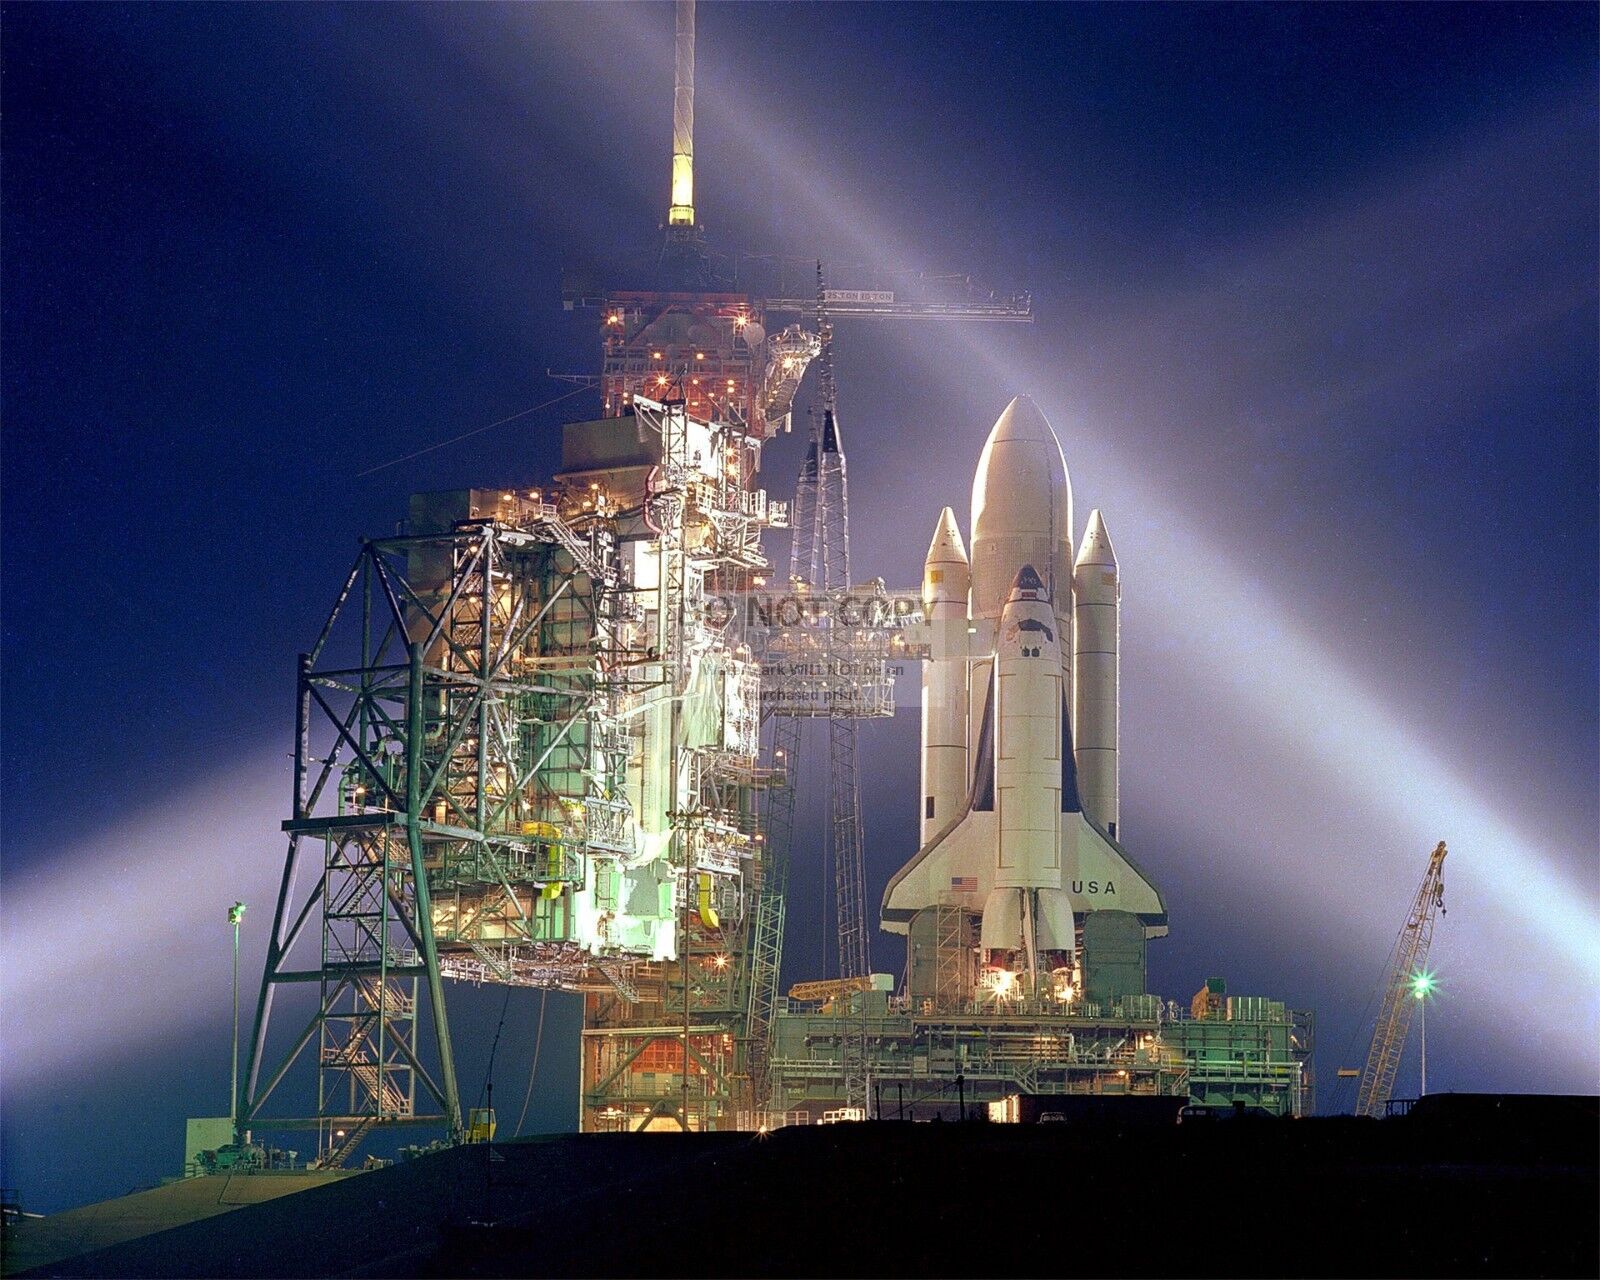 STS-1 SPACE SHUTTLE COLUMBIA TIMED EXPOSURE PICTURE - 8X10 NASA PHOTO (EP-580)